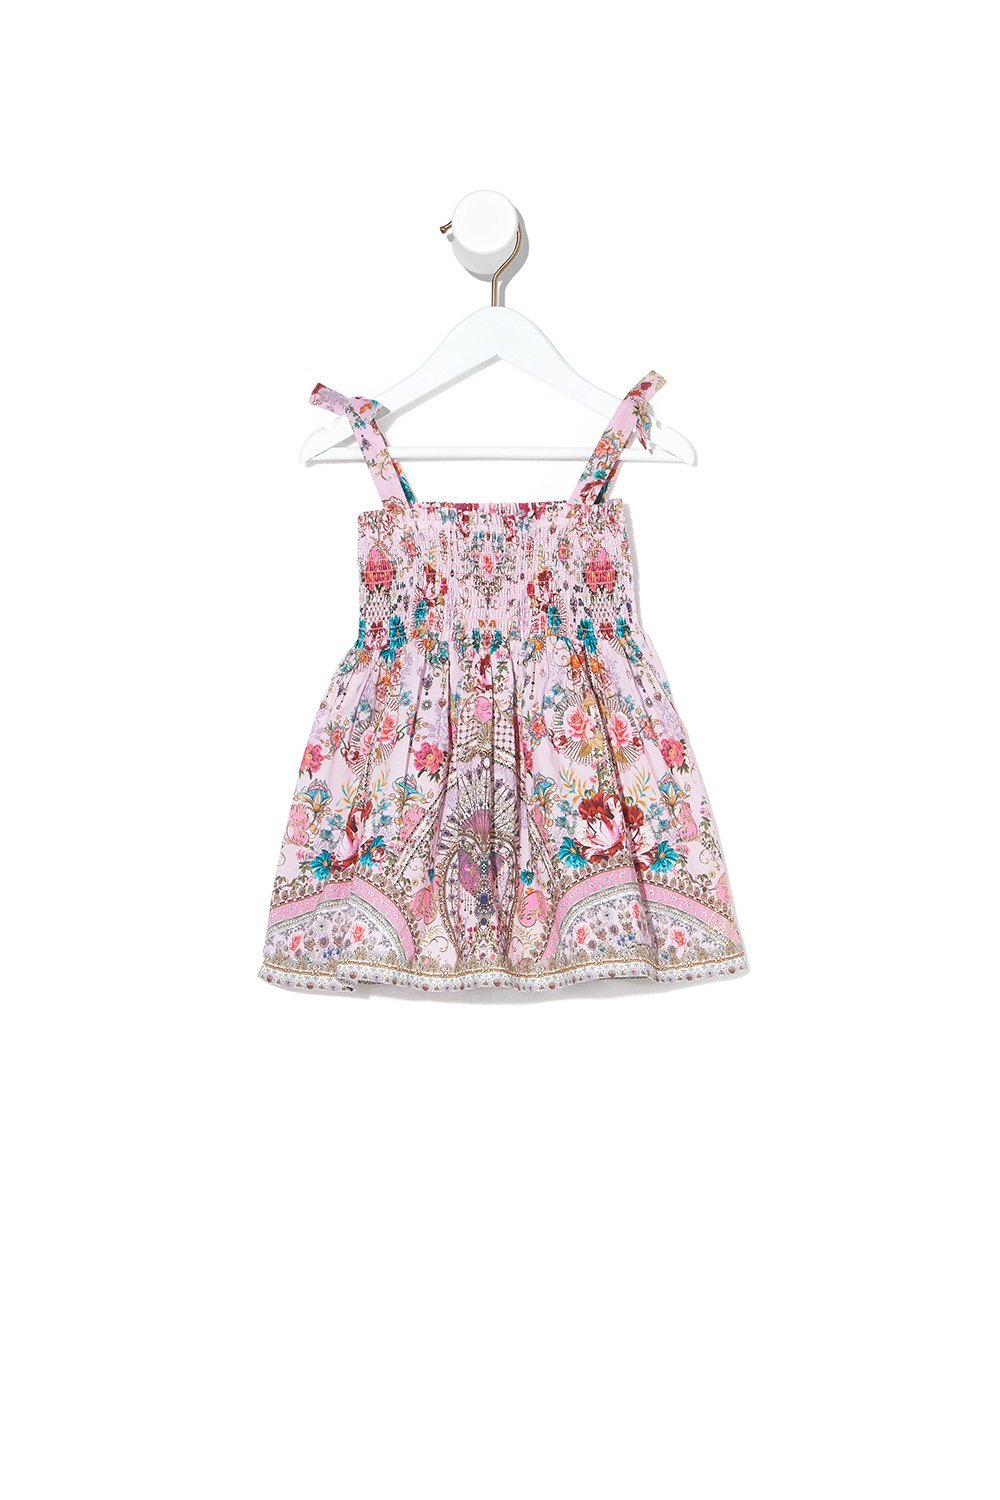 BABIES DRESS WITH SHIRRING BELIEVE IN LOVE